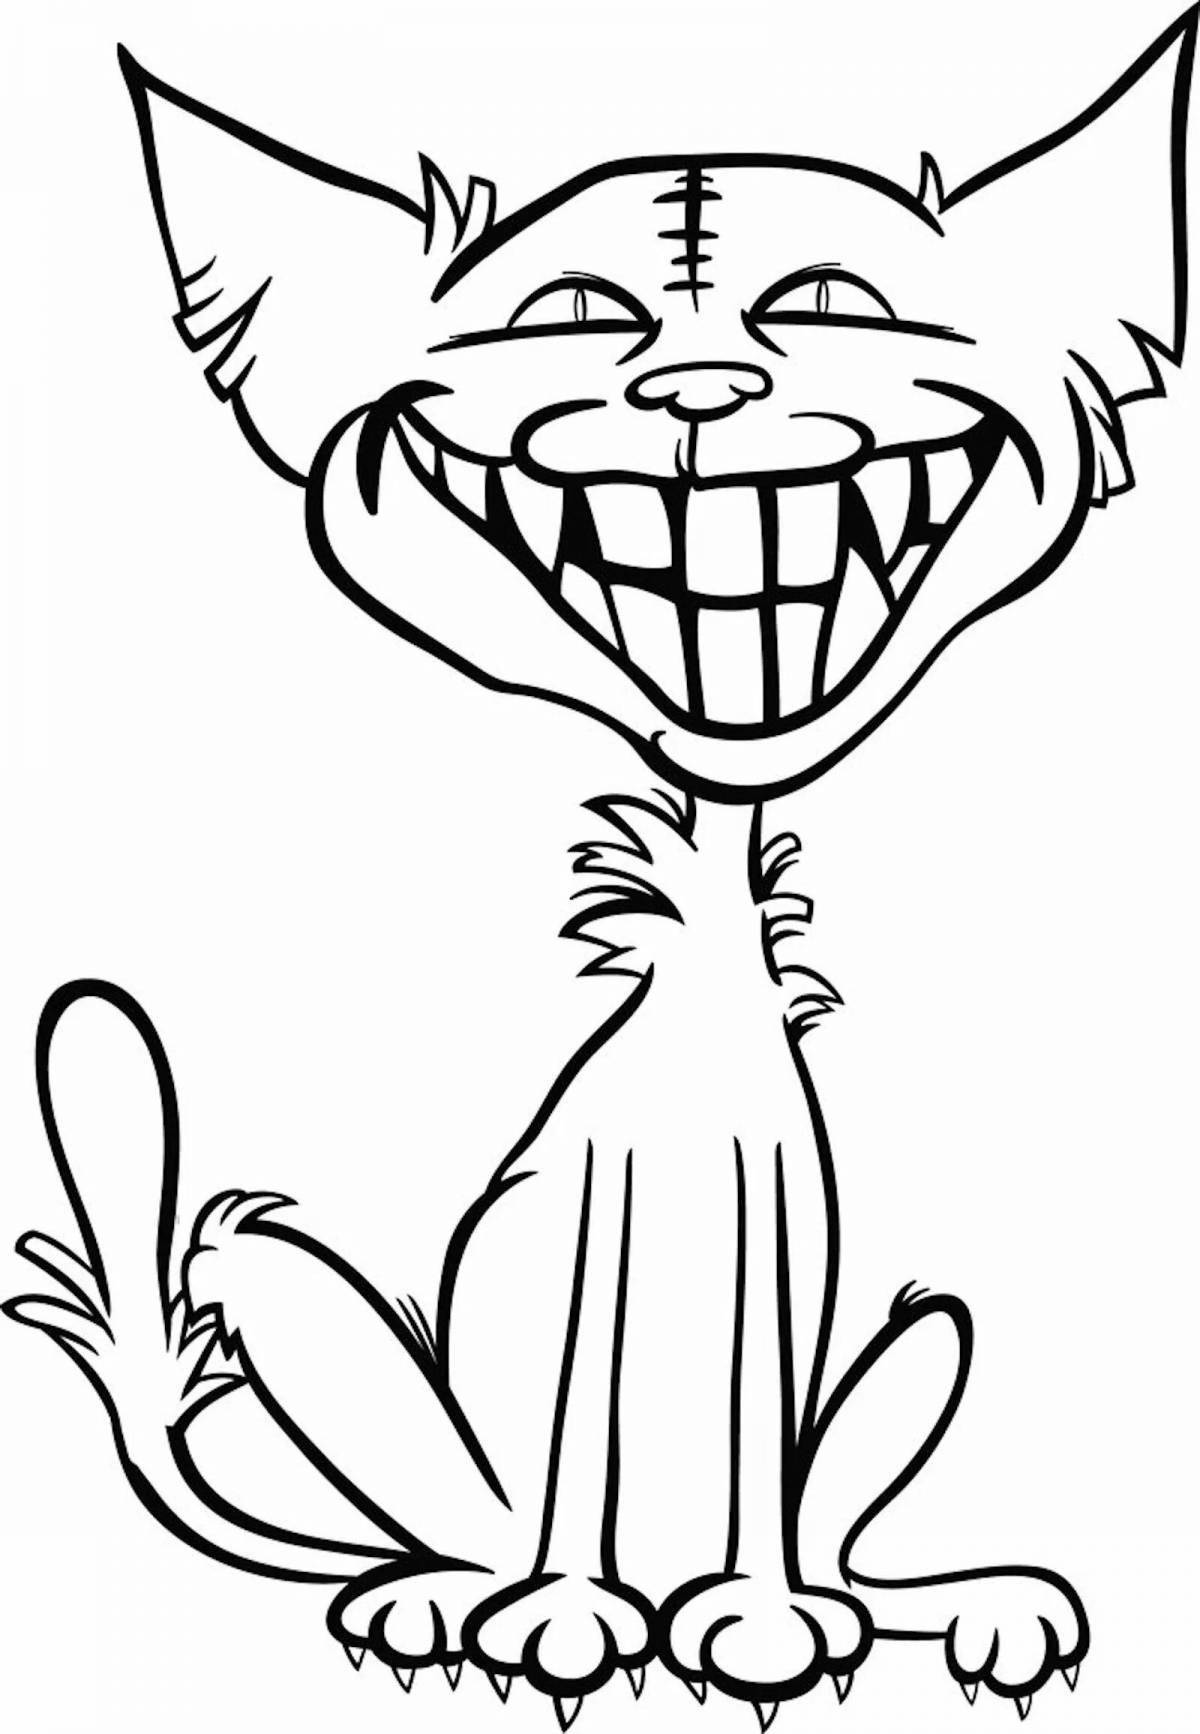 Frustrated angry cat coloring page